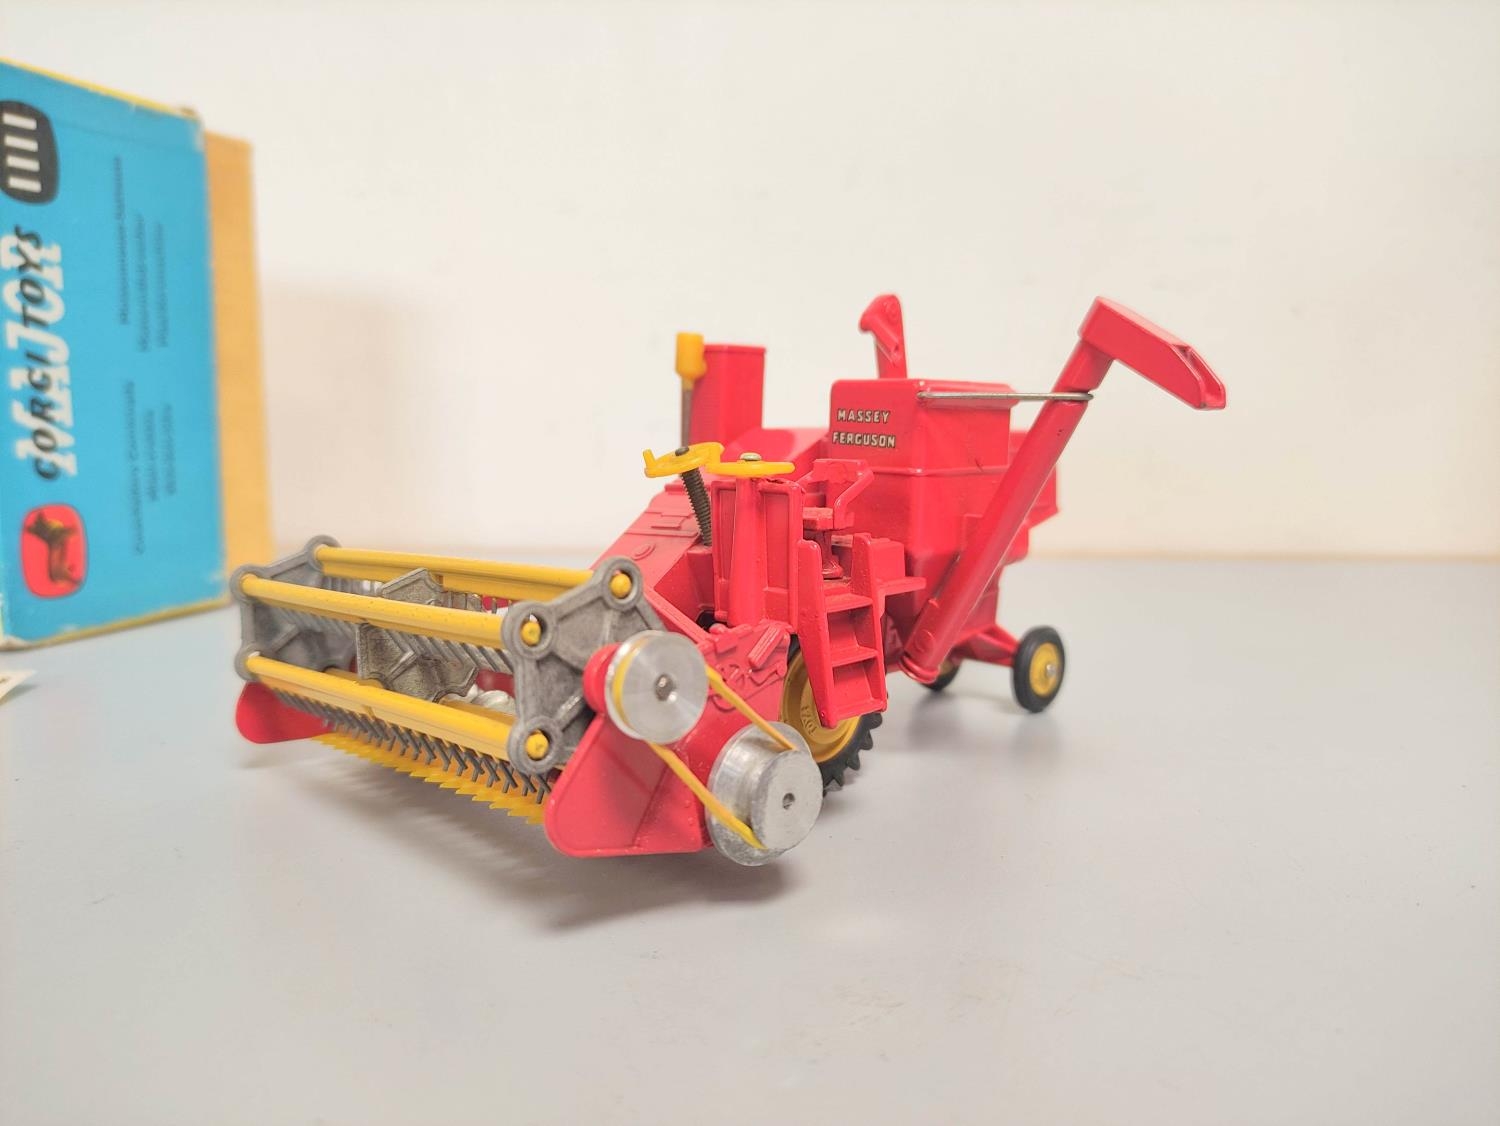 Corgi Toys. No. 1111 Massey Ferguson 780 Combine Harvester. Contained in original box, with two - Image 2 of 8